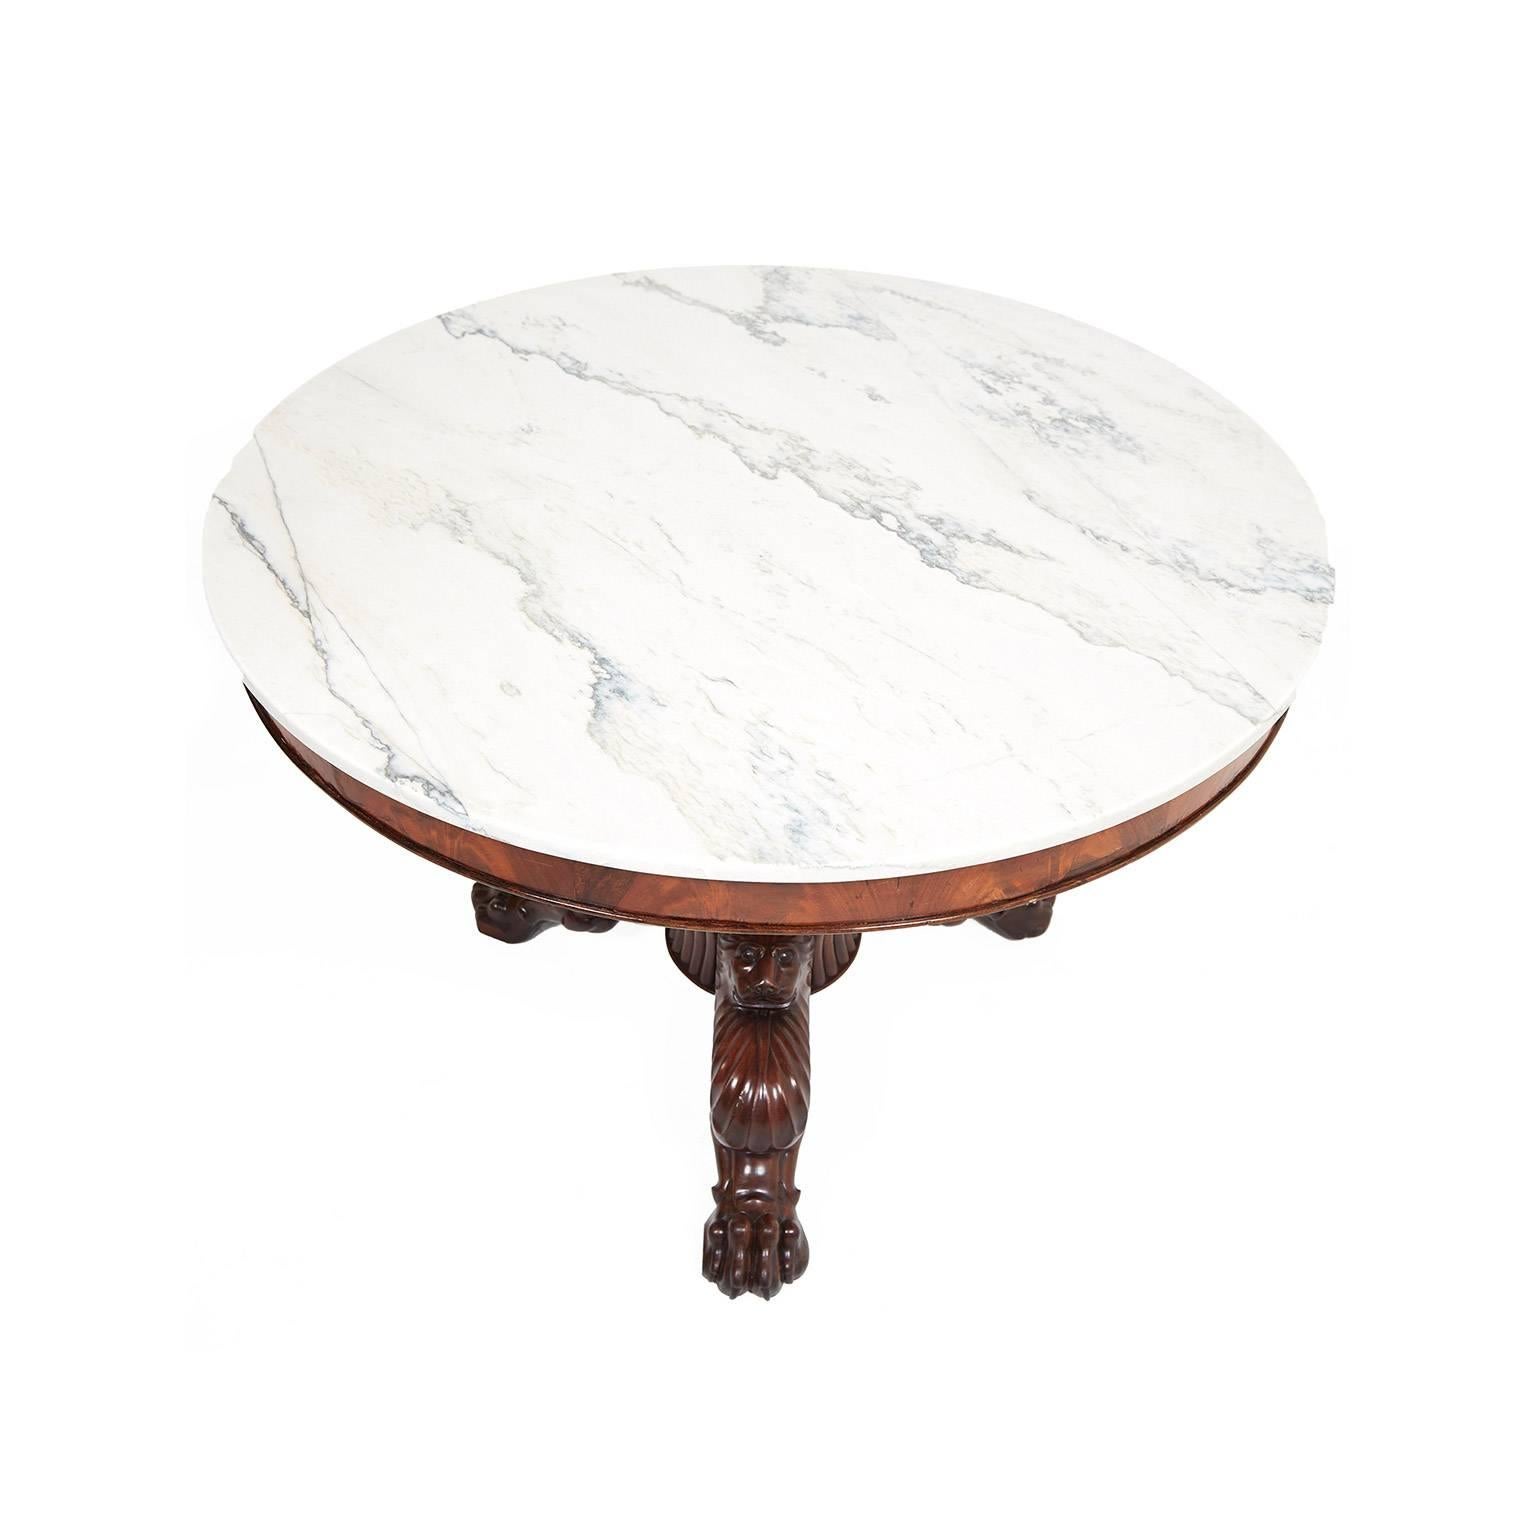 Hand-Carved Antique French Marble-Top Gueridon, circa 1840